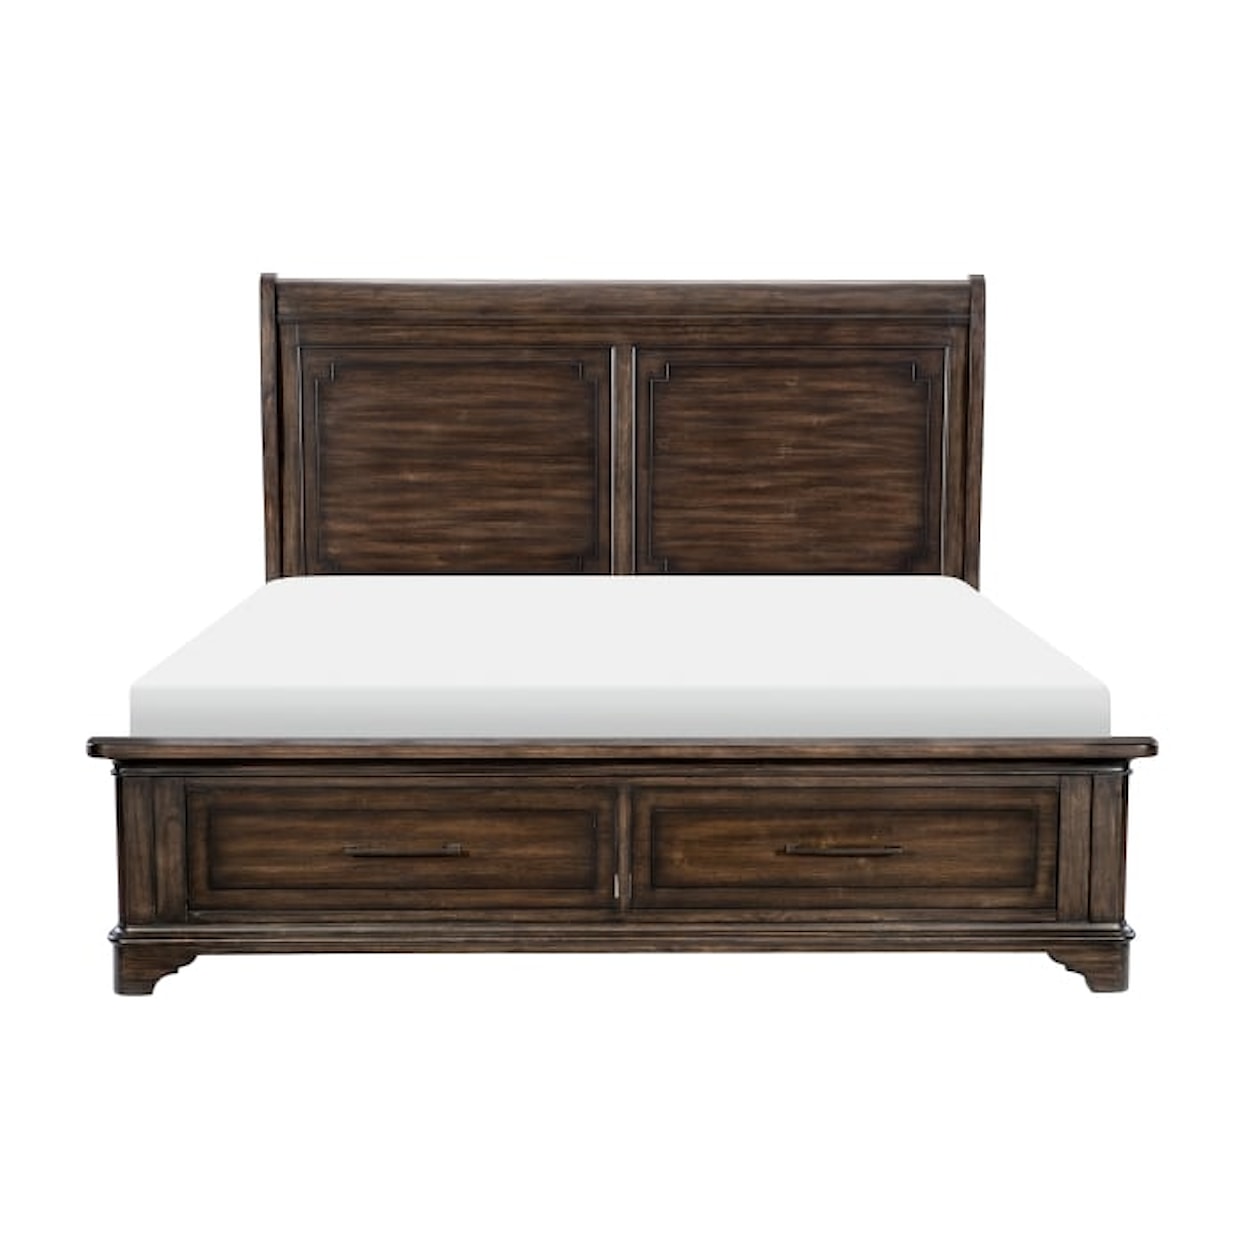 Homelegance Furniture Boone King  Bed with FB Storage